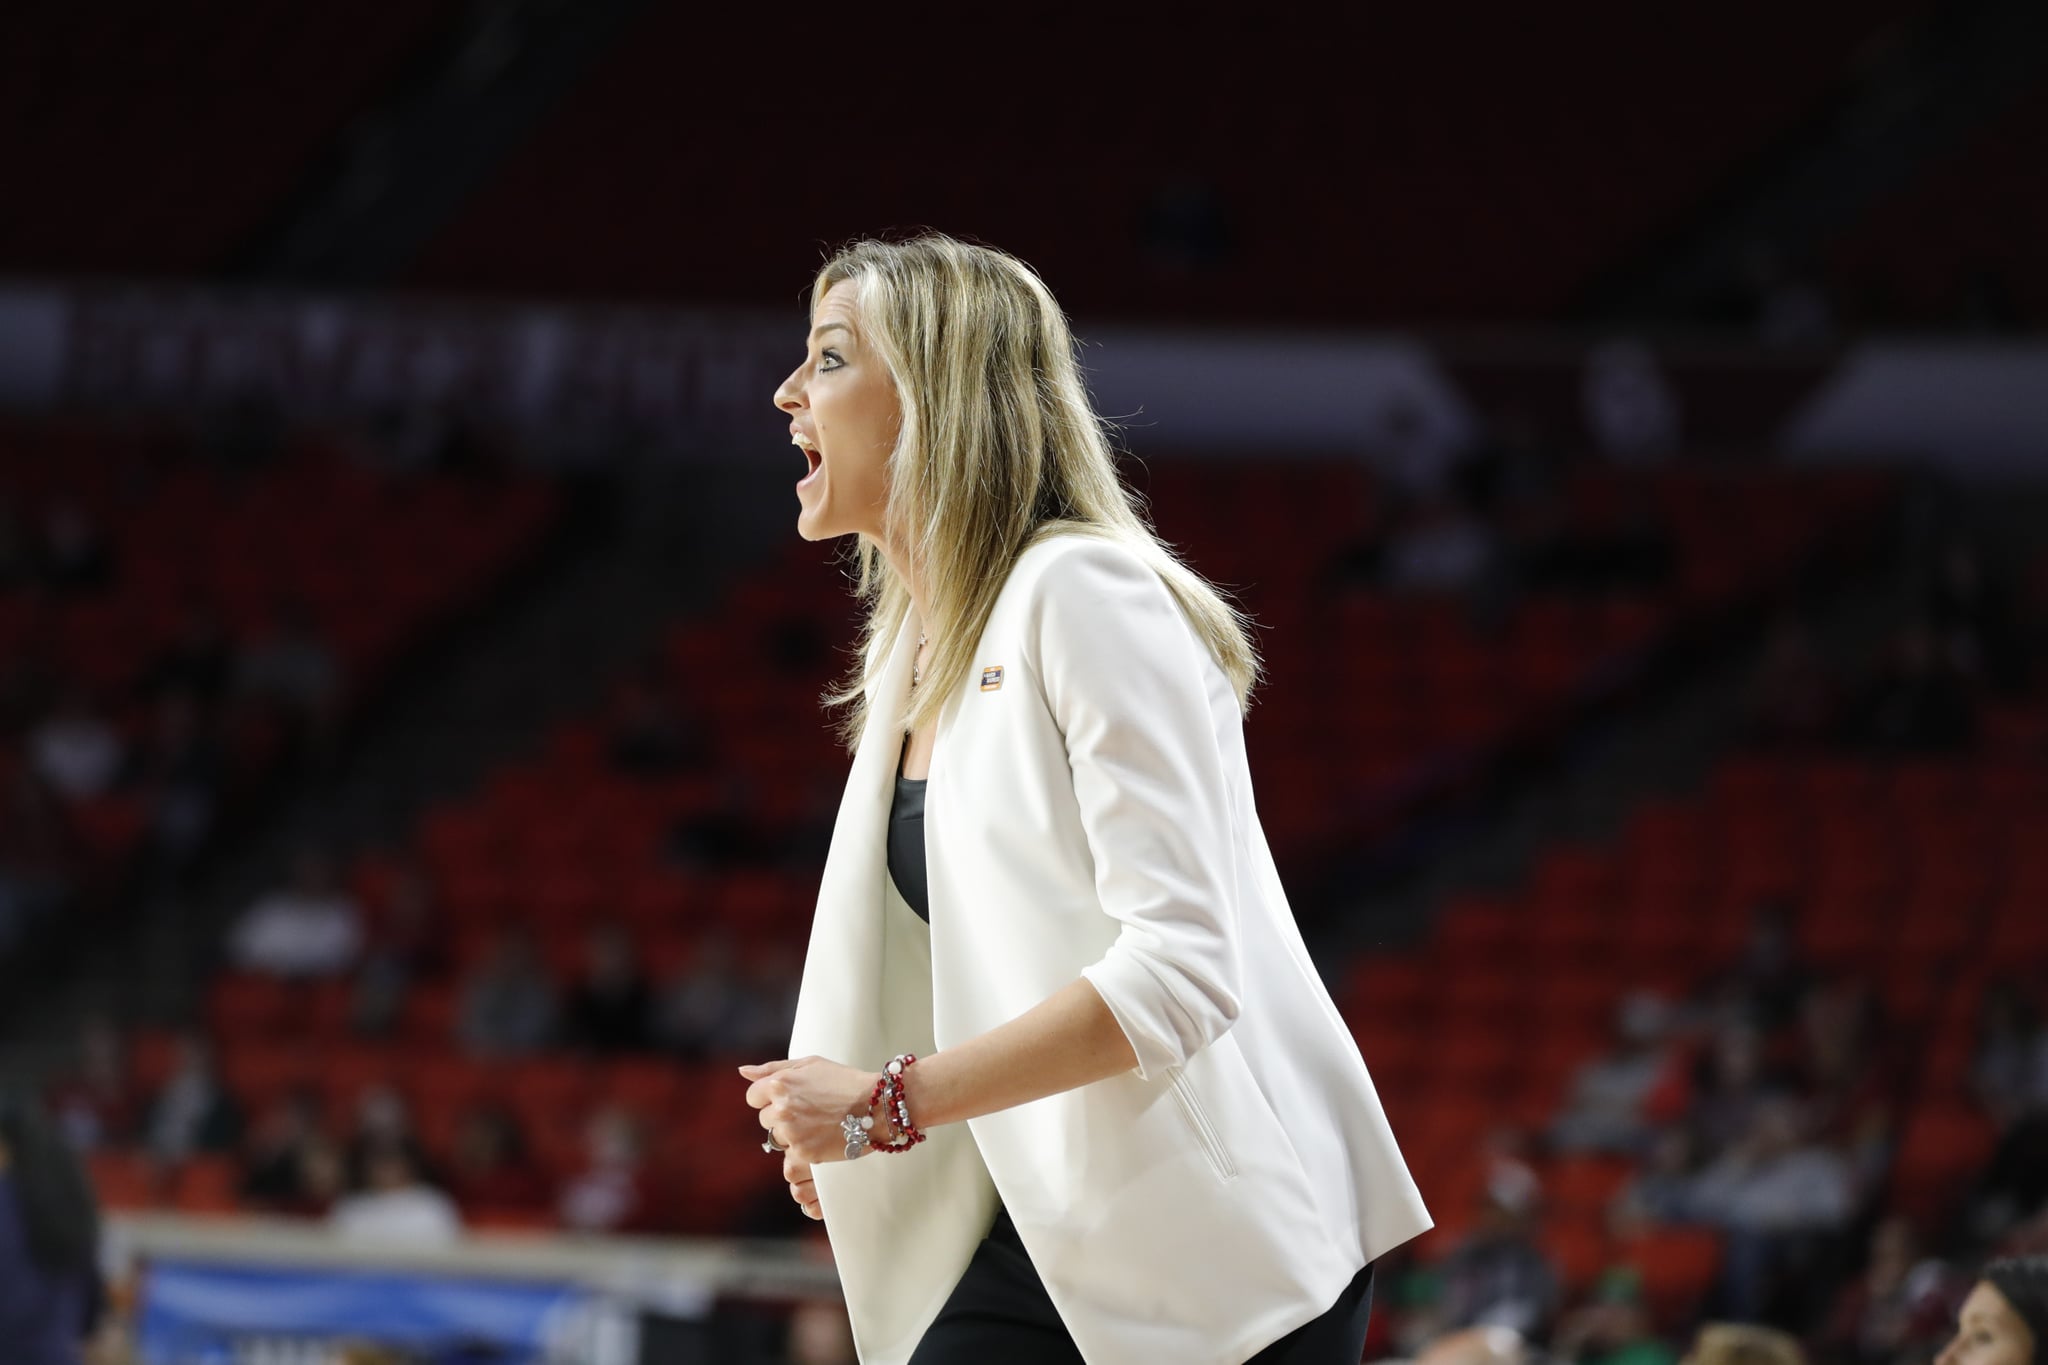 NORMAN, OK - MARCH 21: Oklahoma Sooners head coach Jennie Baranczyk yells after a call during the second round of the 2022 NCAA Women's Basketball Tournament held at the Lloyd Noble Center on March 21, 2022 in Norman, Oklahoma. (Photo by Alonzo Adams/NCAA Photos via Getty Images)